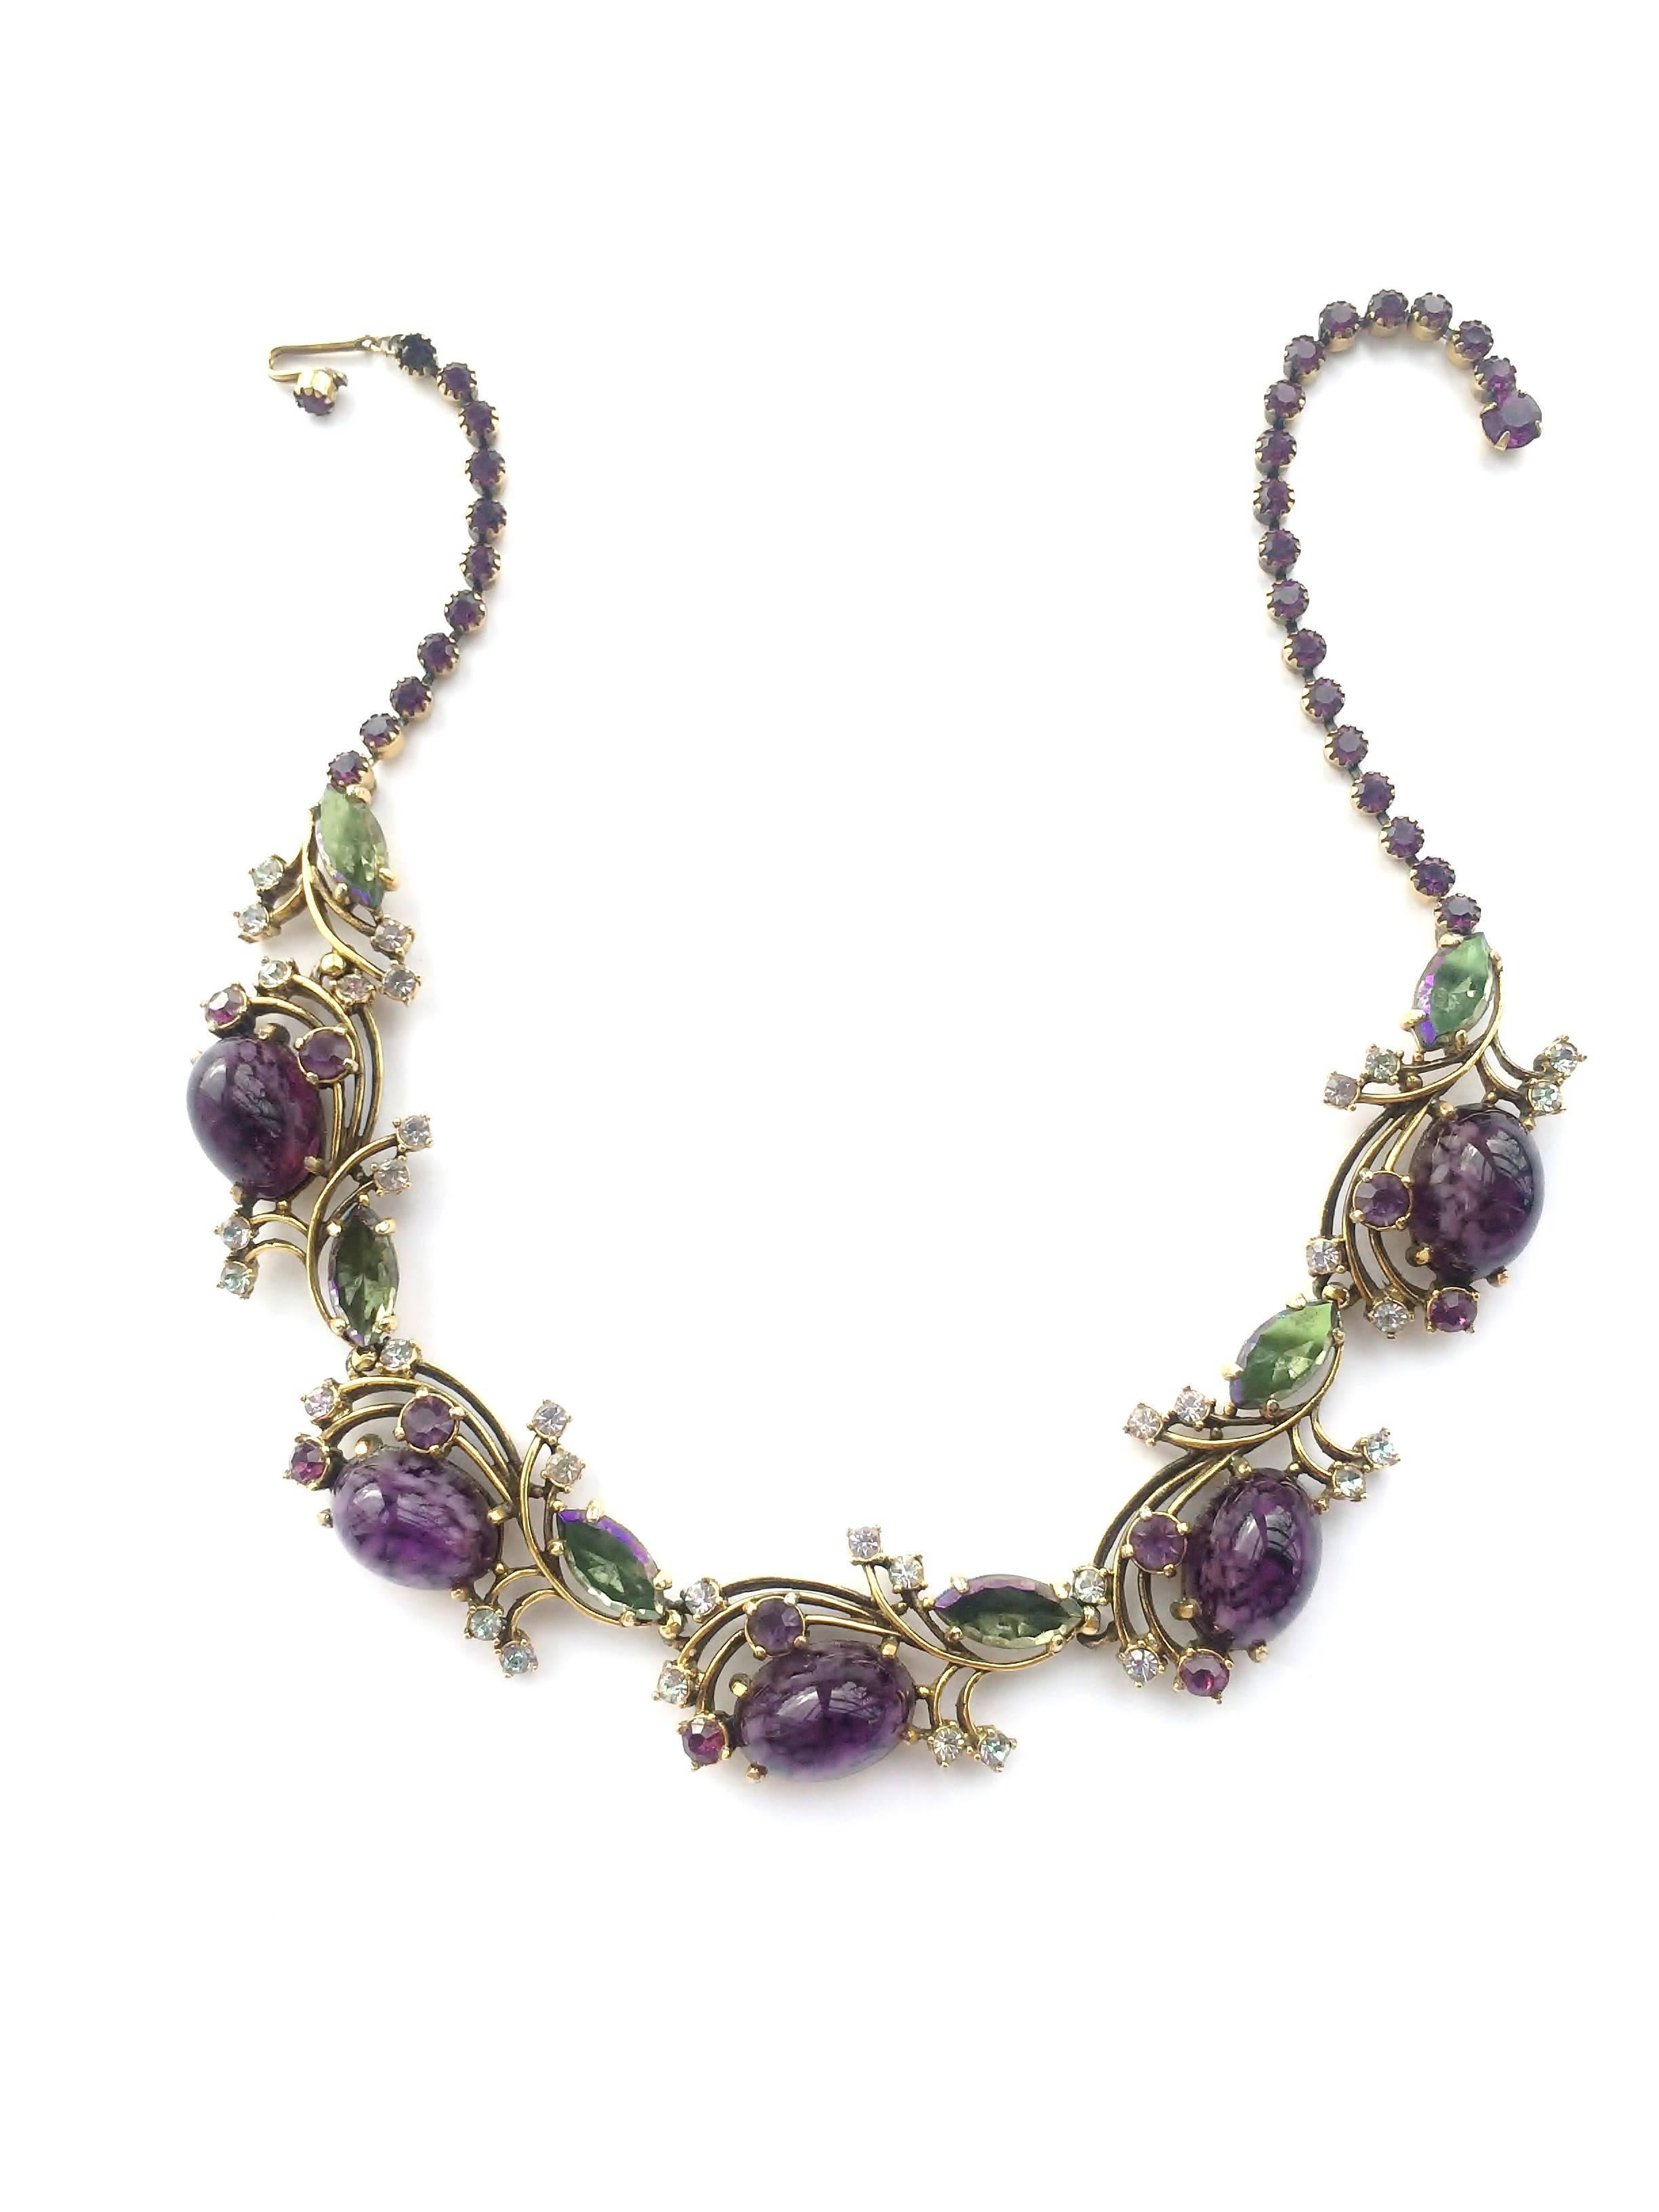 Set with deep mottled amethyst cabuchons, and highlights of deep aurora and light amethyst pastes, this necklace and earrings by the wonderful Elsa Schiaparelli from the mid 1950s, has a poise and elegance to heighten any wearer/outfit. Highly